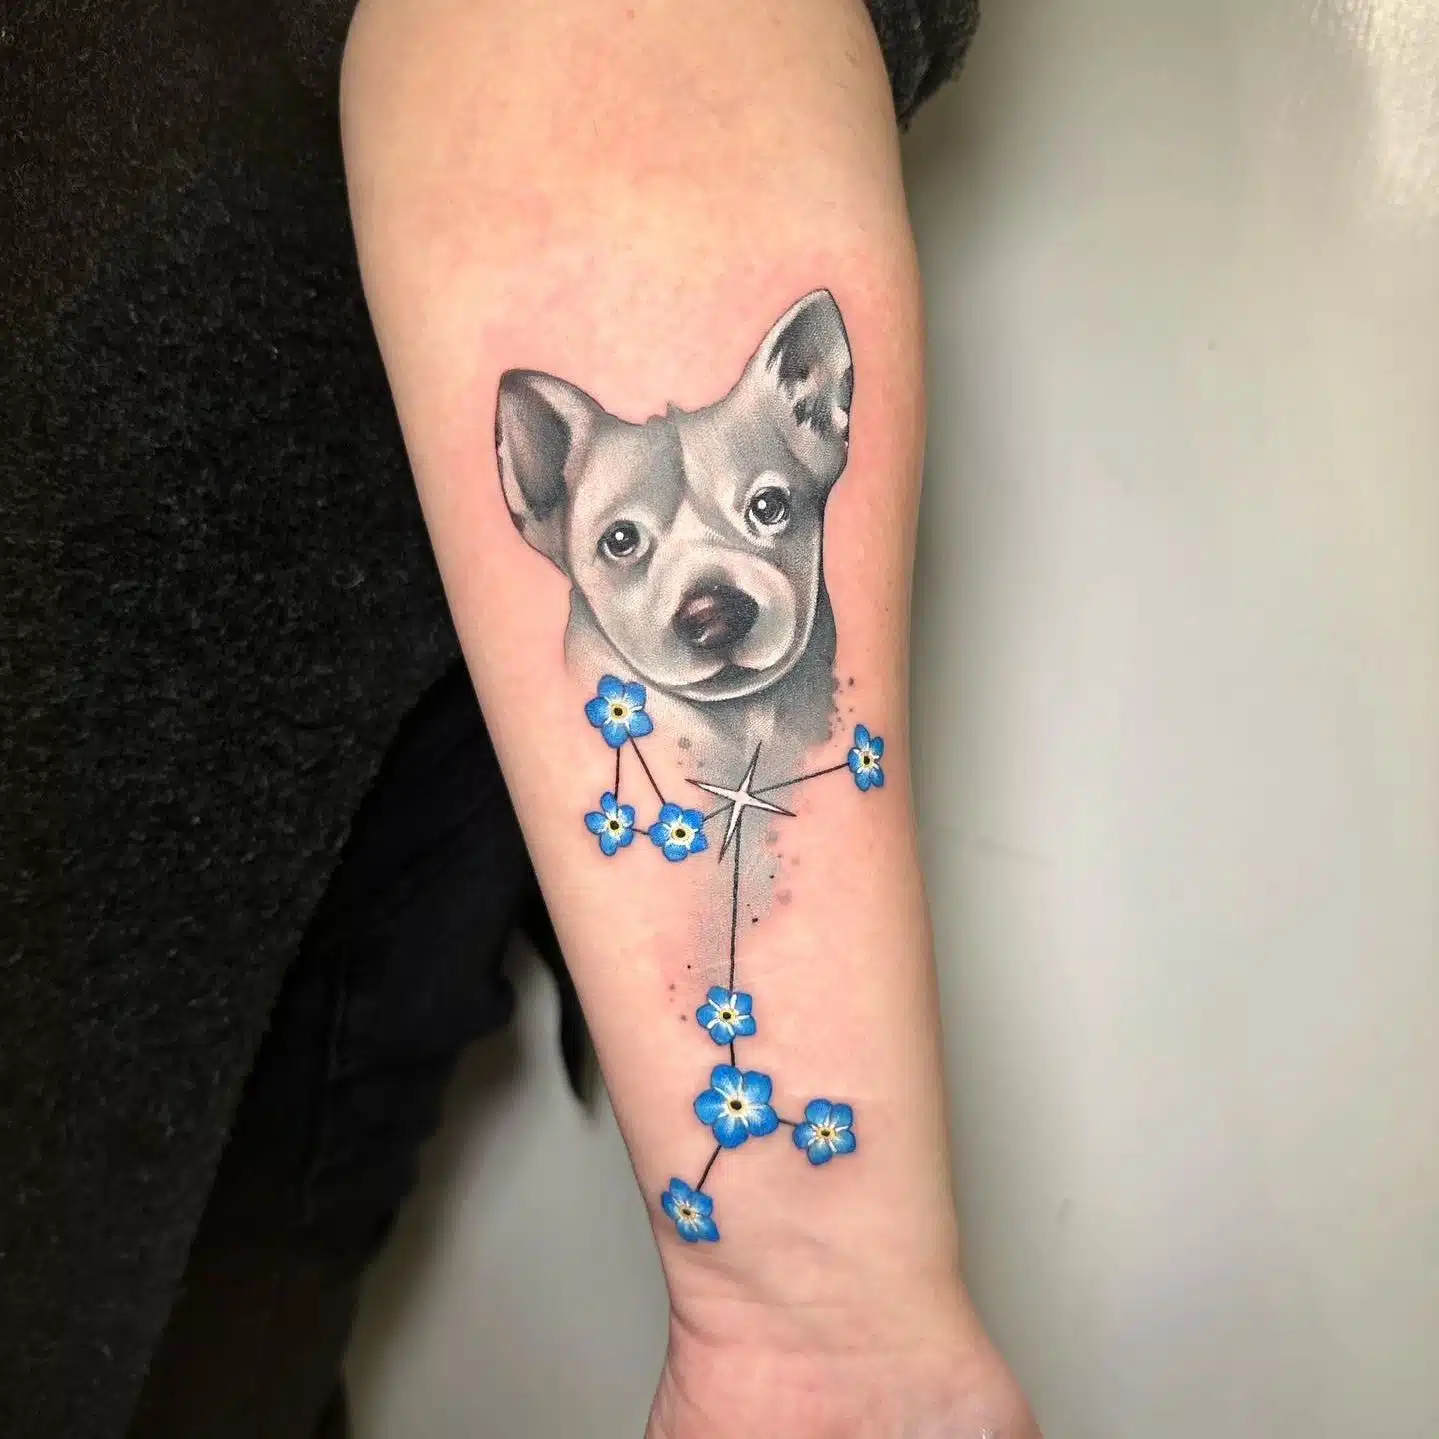 Wee Sirius the good boi and a forget-me-not constellation. Always a pleasure tattooing tattooer and thanks for coming all the way from Rome valeria.cynath_tattooer . Tattoo by oor Noemi ❤️
noemi_tattoo

            